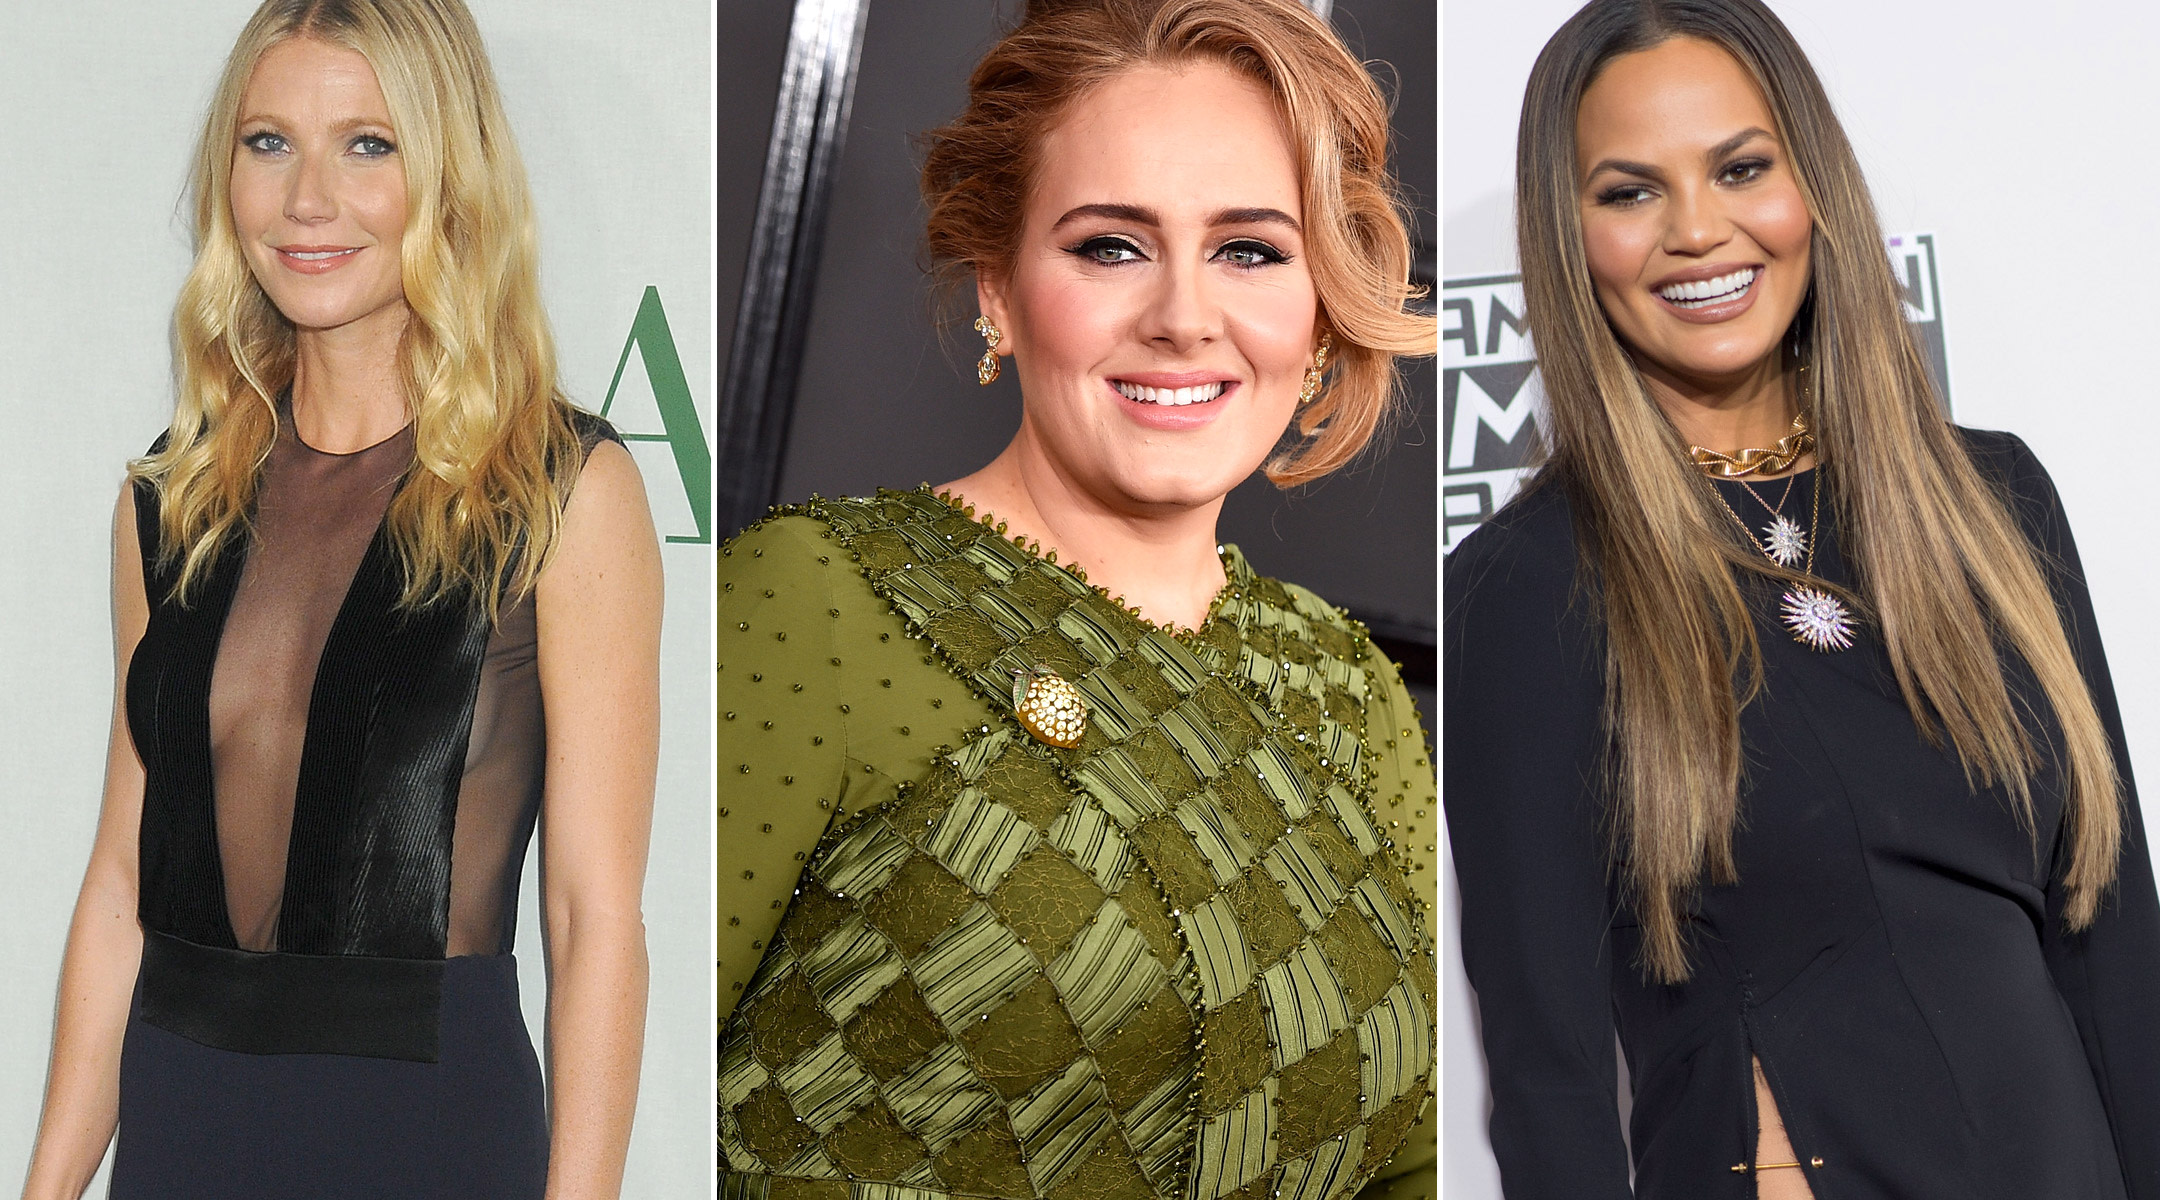 Chrissy Teigen, Gwyneth Paltrow and Adele each are celebrities who have dealt with postpartum depression.